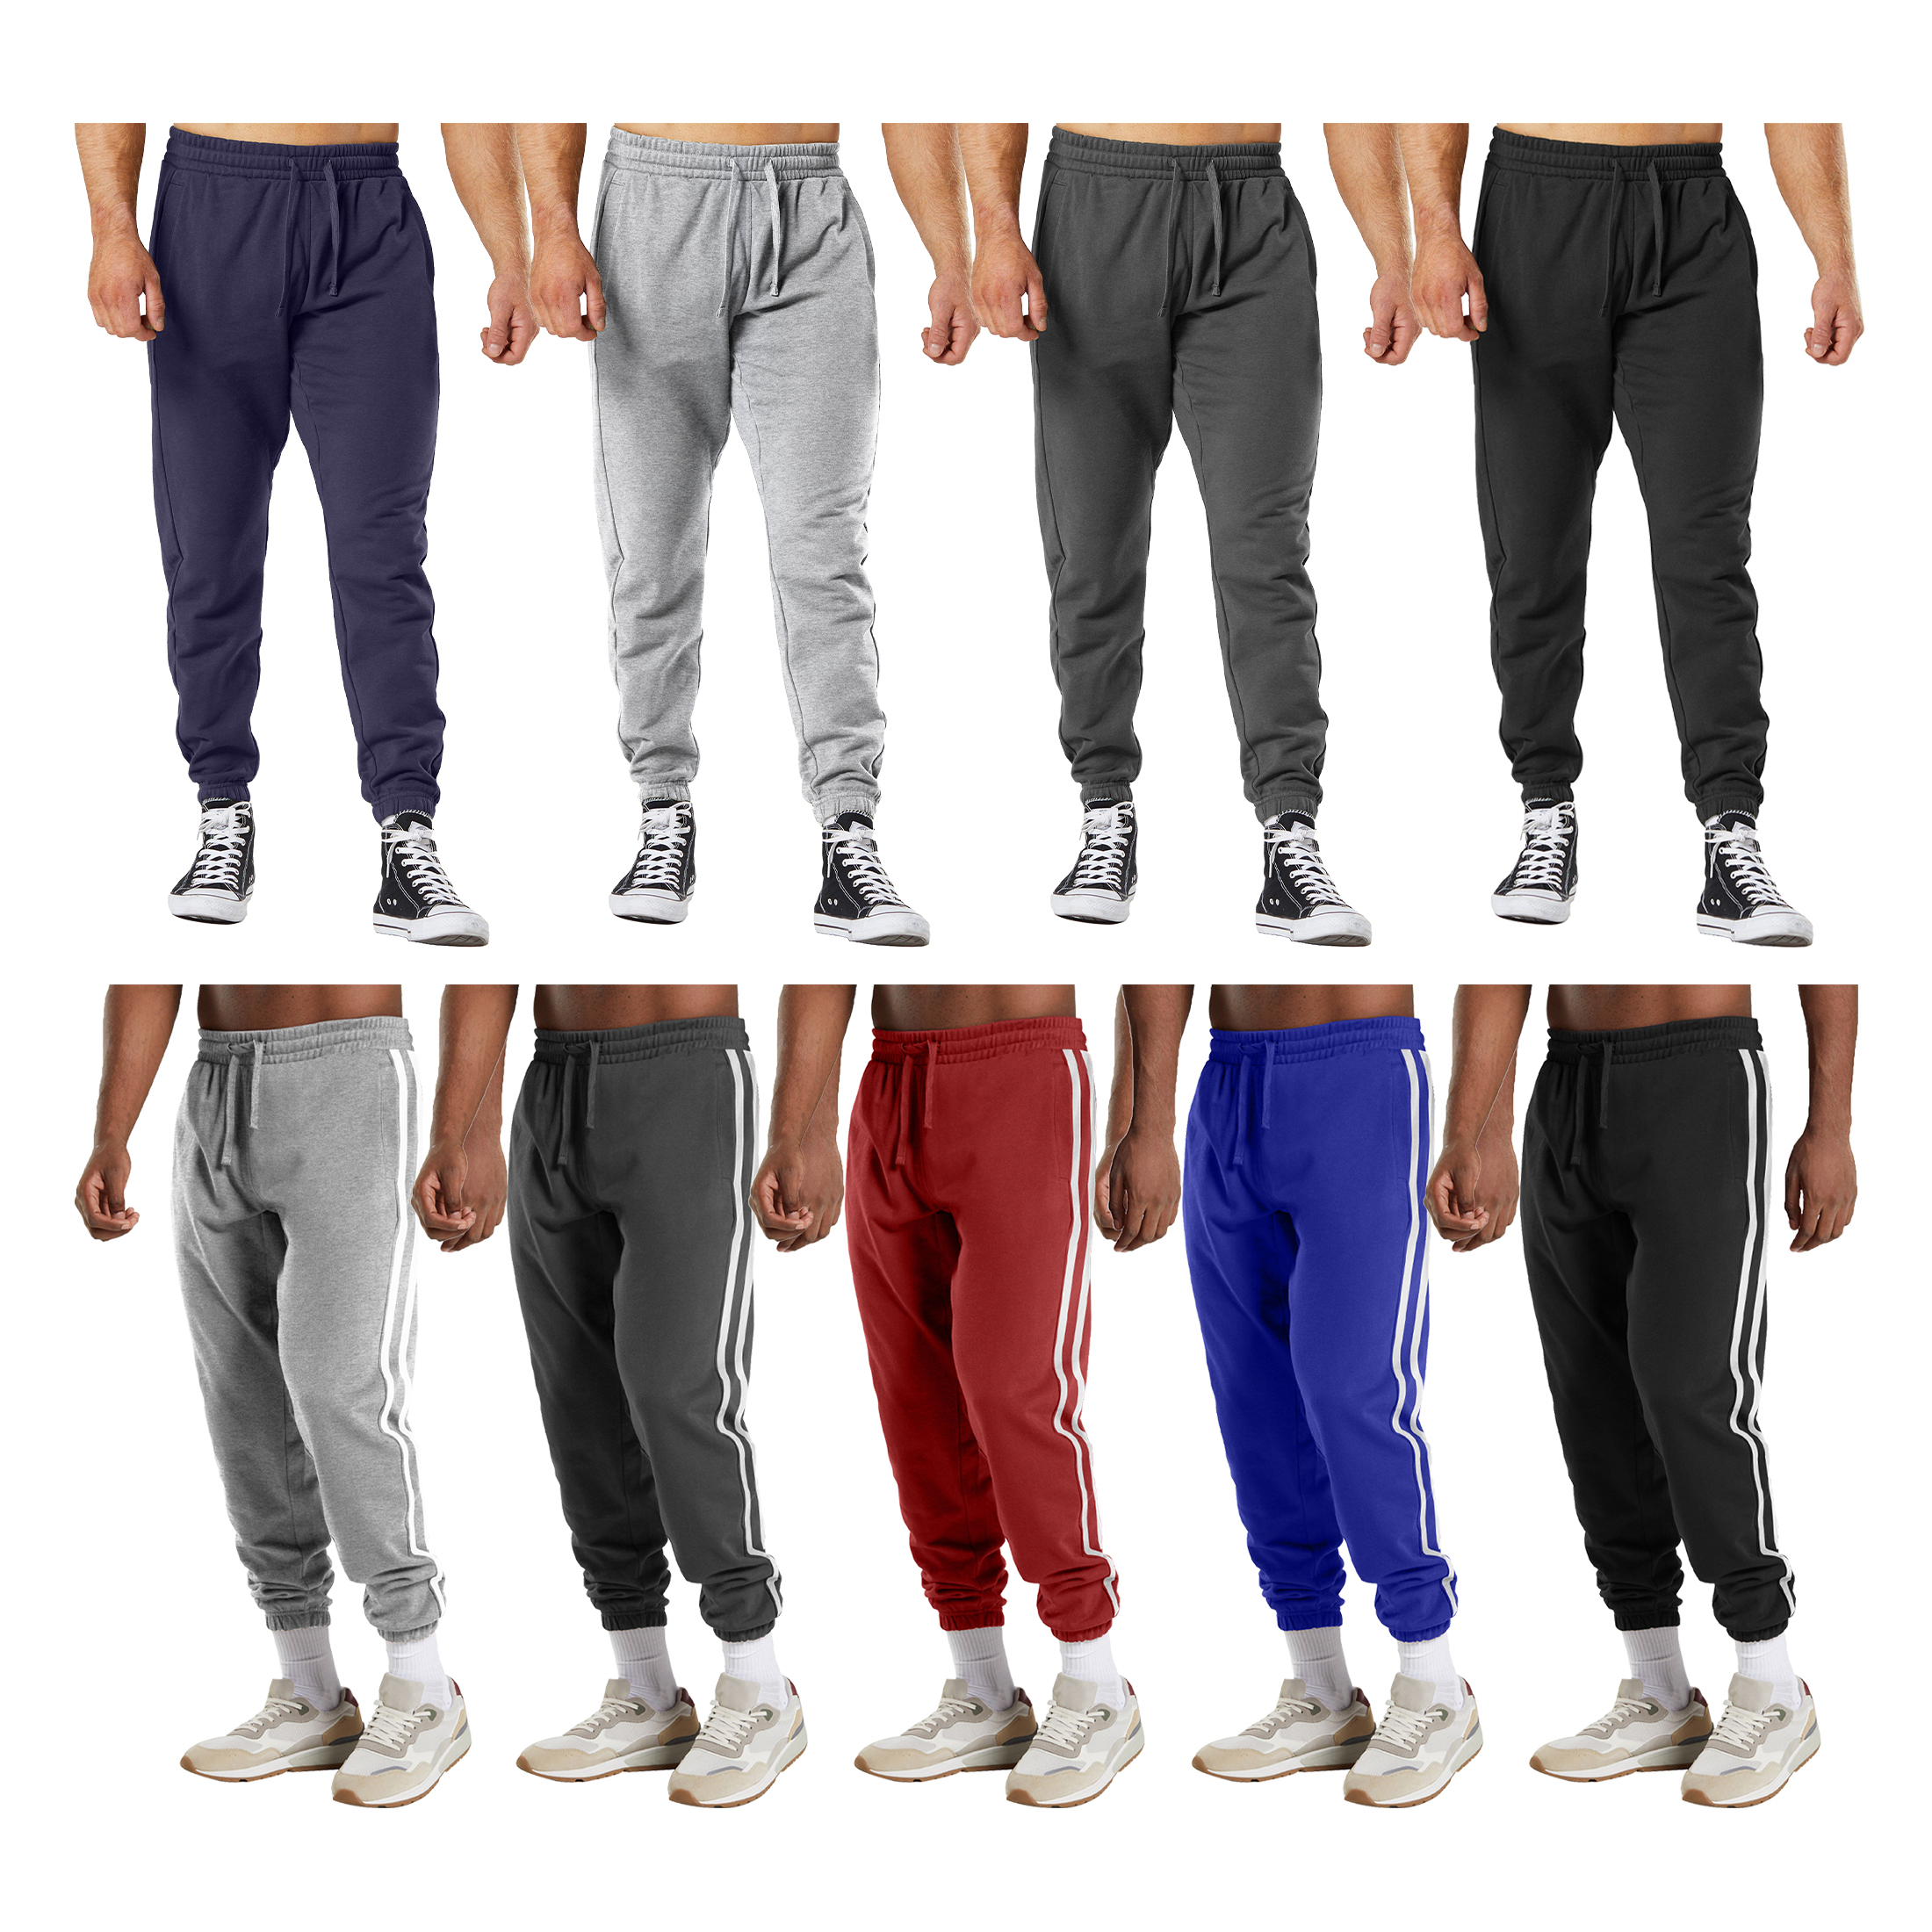 Multi-Pack: Men's Casual Fleece-Lined Elastic Bottom Jogger Pants With Pockets - 3-PACK, L